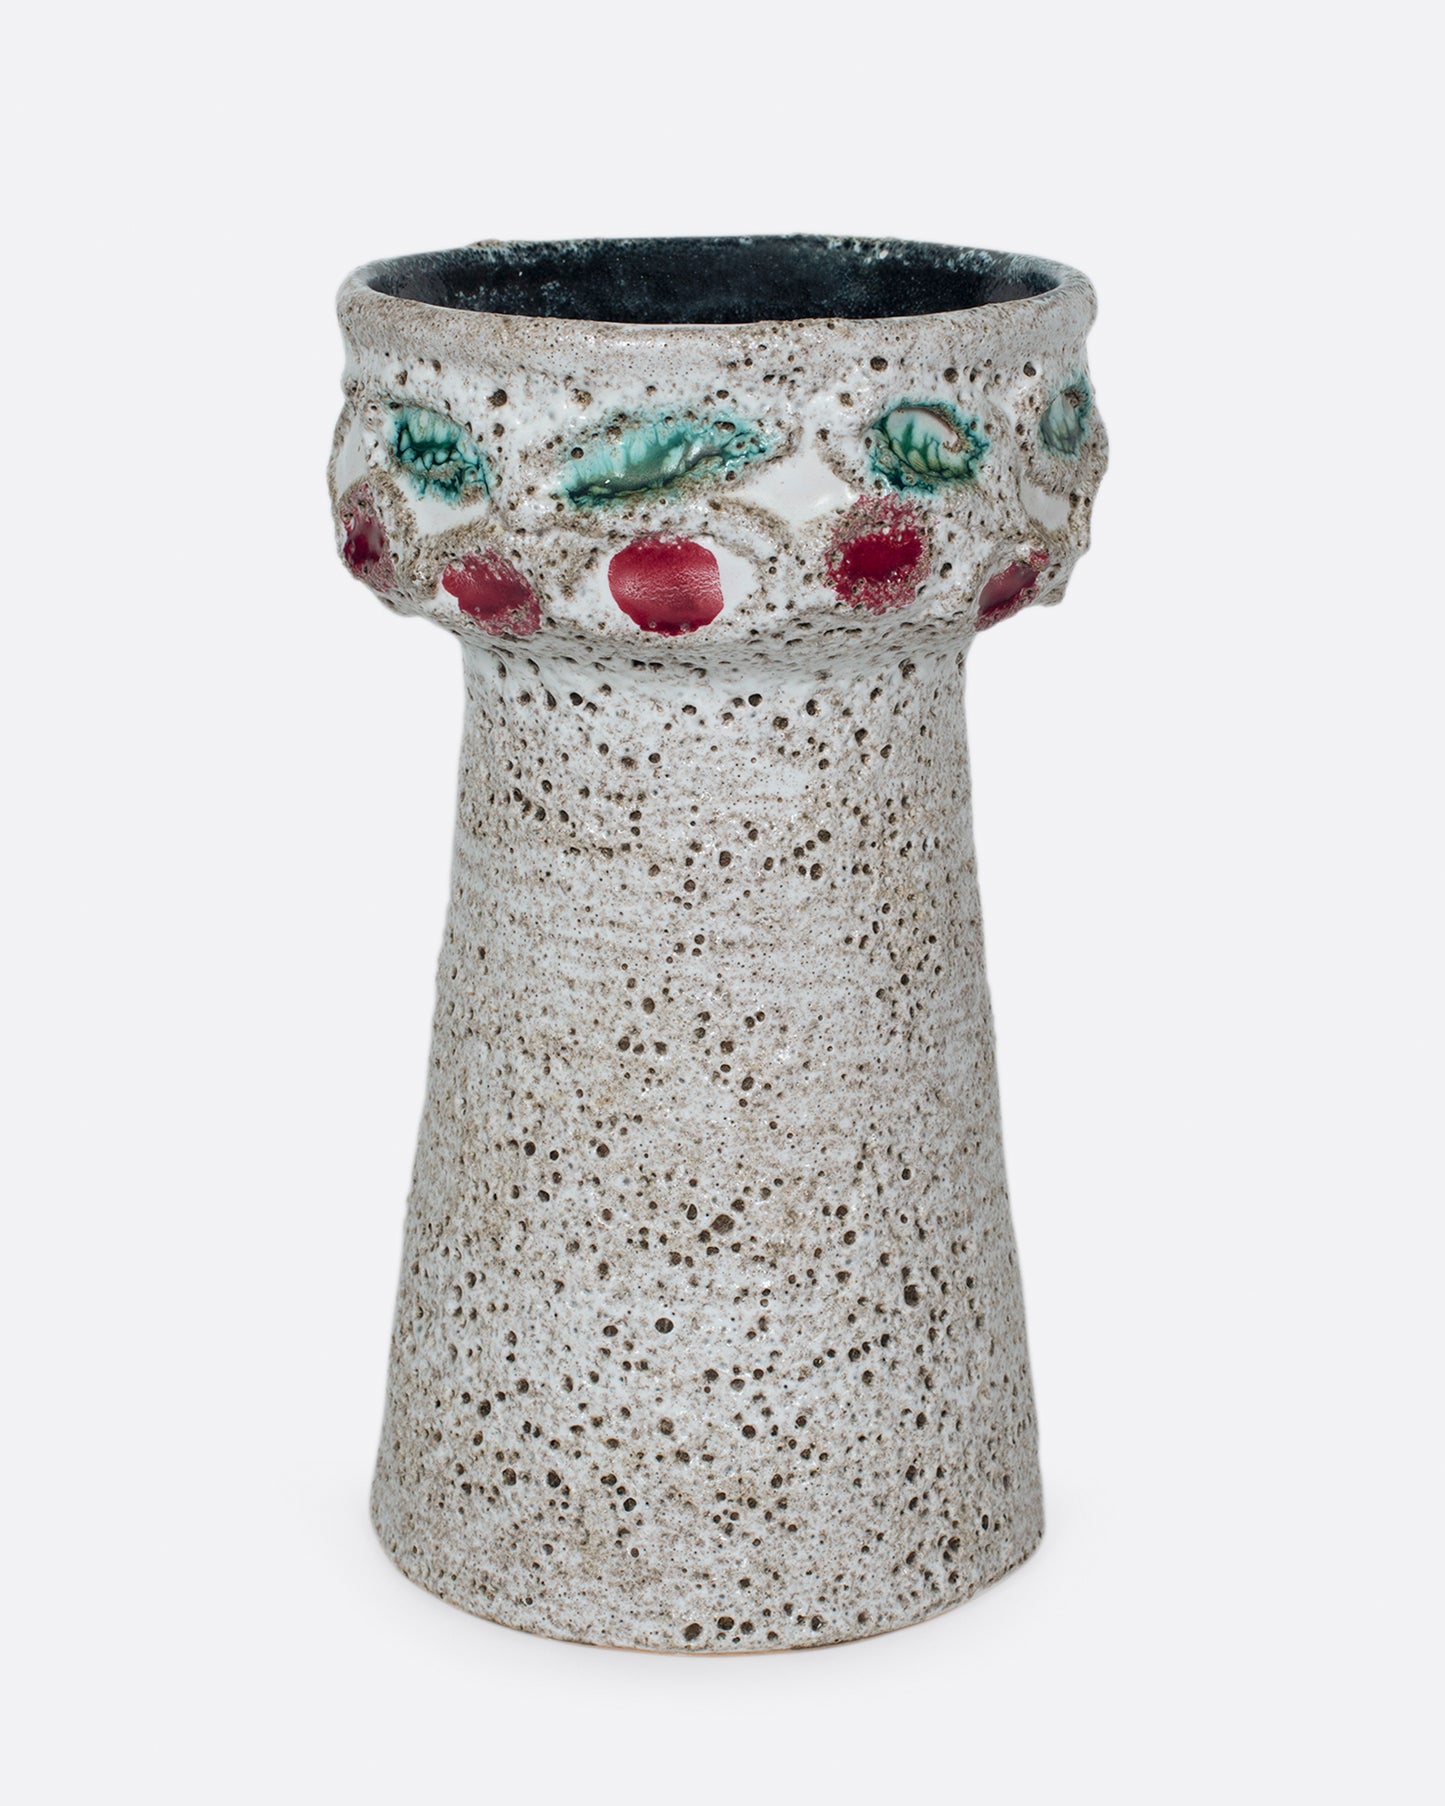 A mid-century German vase with a wide mouth and bubbly texture.